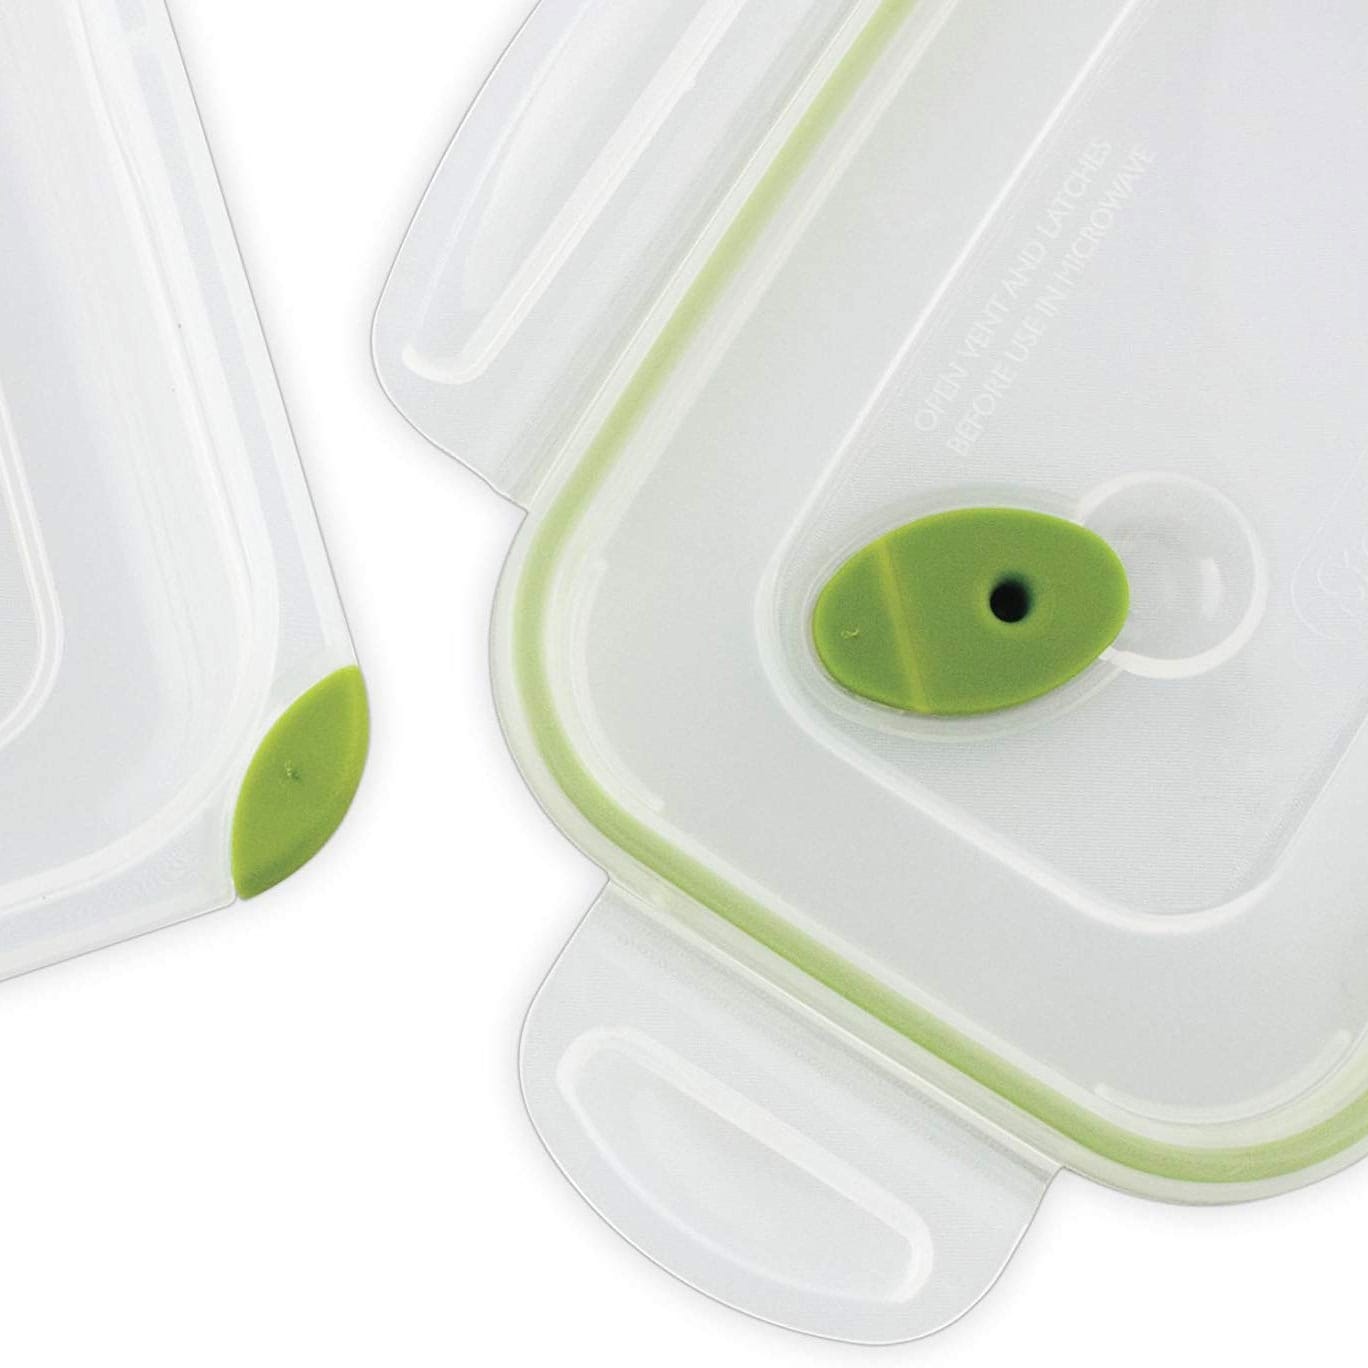 https://ak1.ostkcdn.com/images/products/is/images/direct/b402873ecf7c7d7b0f65c76cc57d589afdaf5f7f/Sterilite-3.1-Cup-Rectangular-UltraSeal-Food-Storage-Container%2C-Green-%2812-Pack%29.jpg